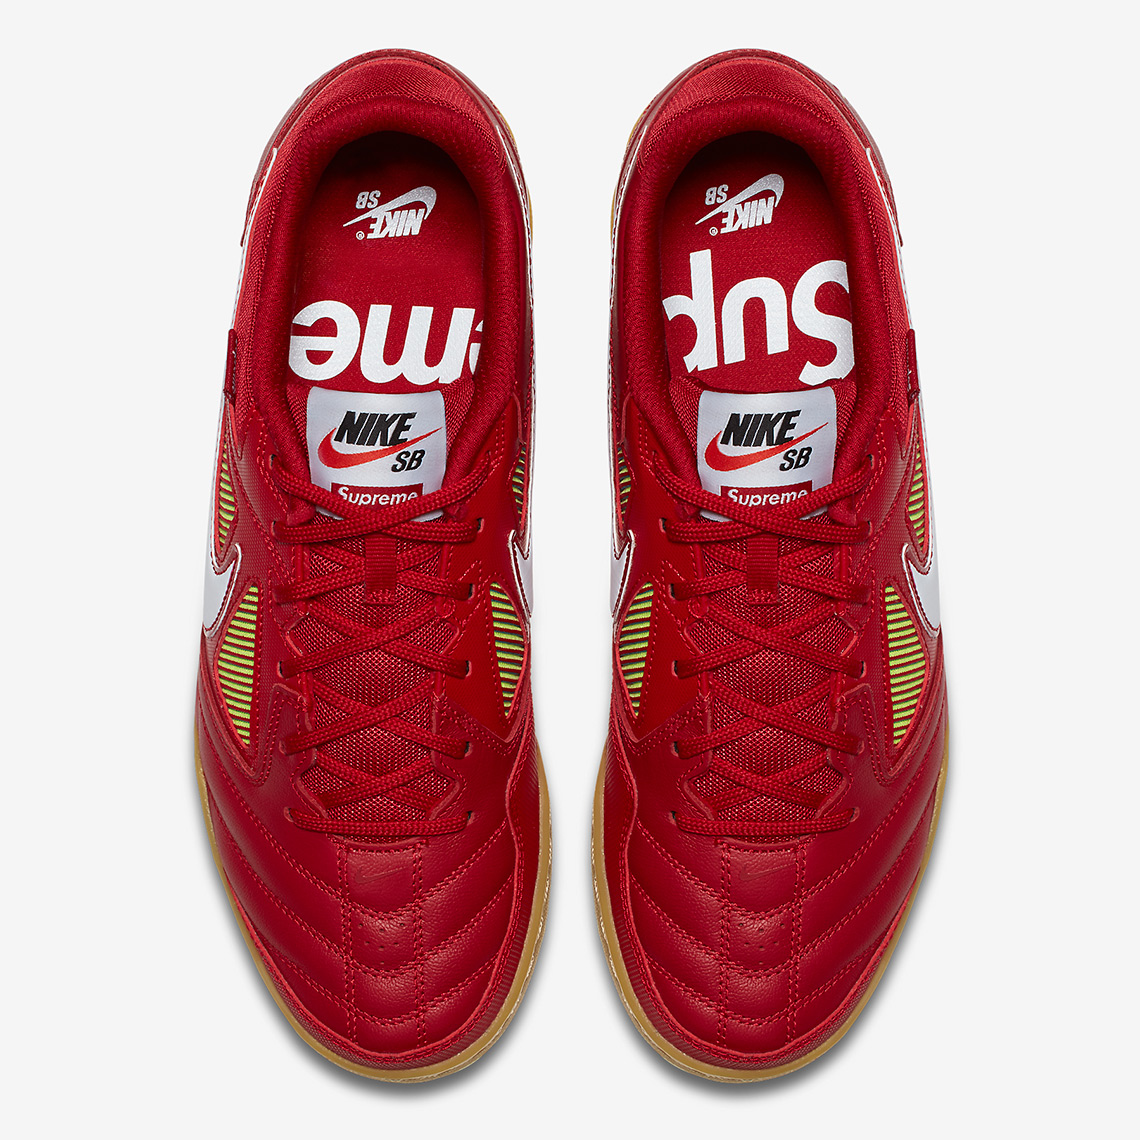 Supreme's Nike SB Gato Collab Is Dropping on SNKRS